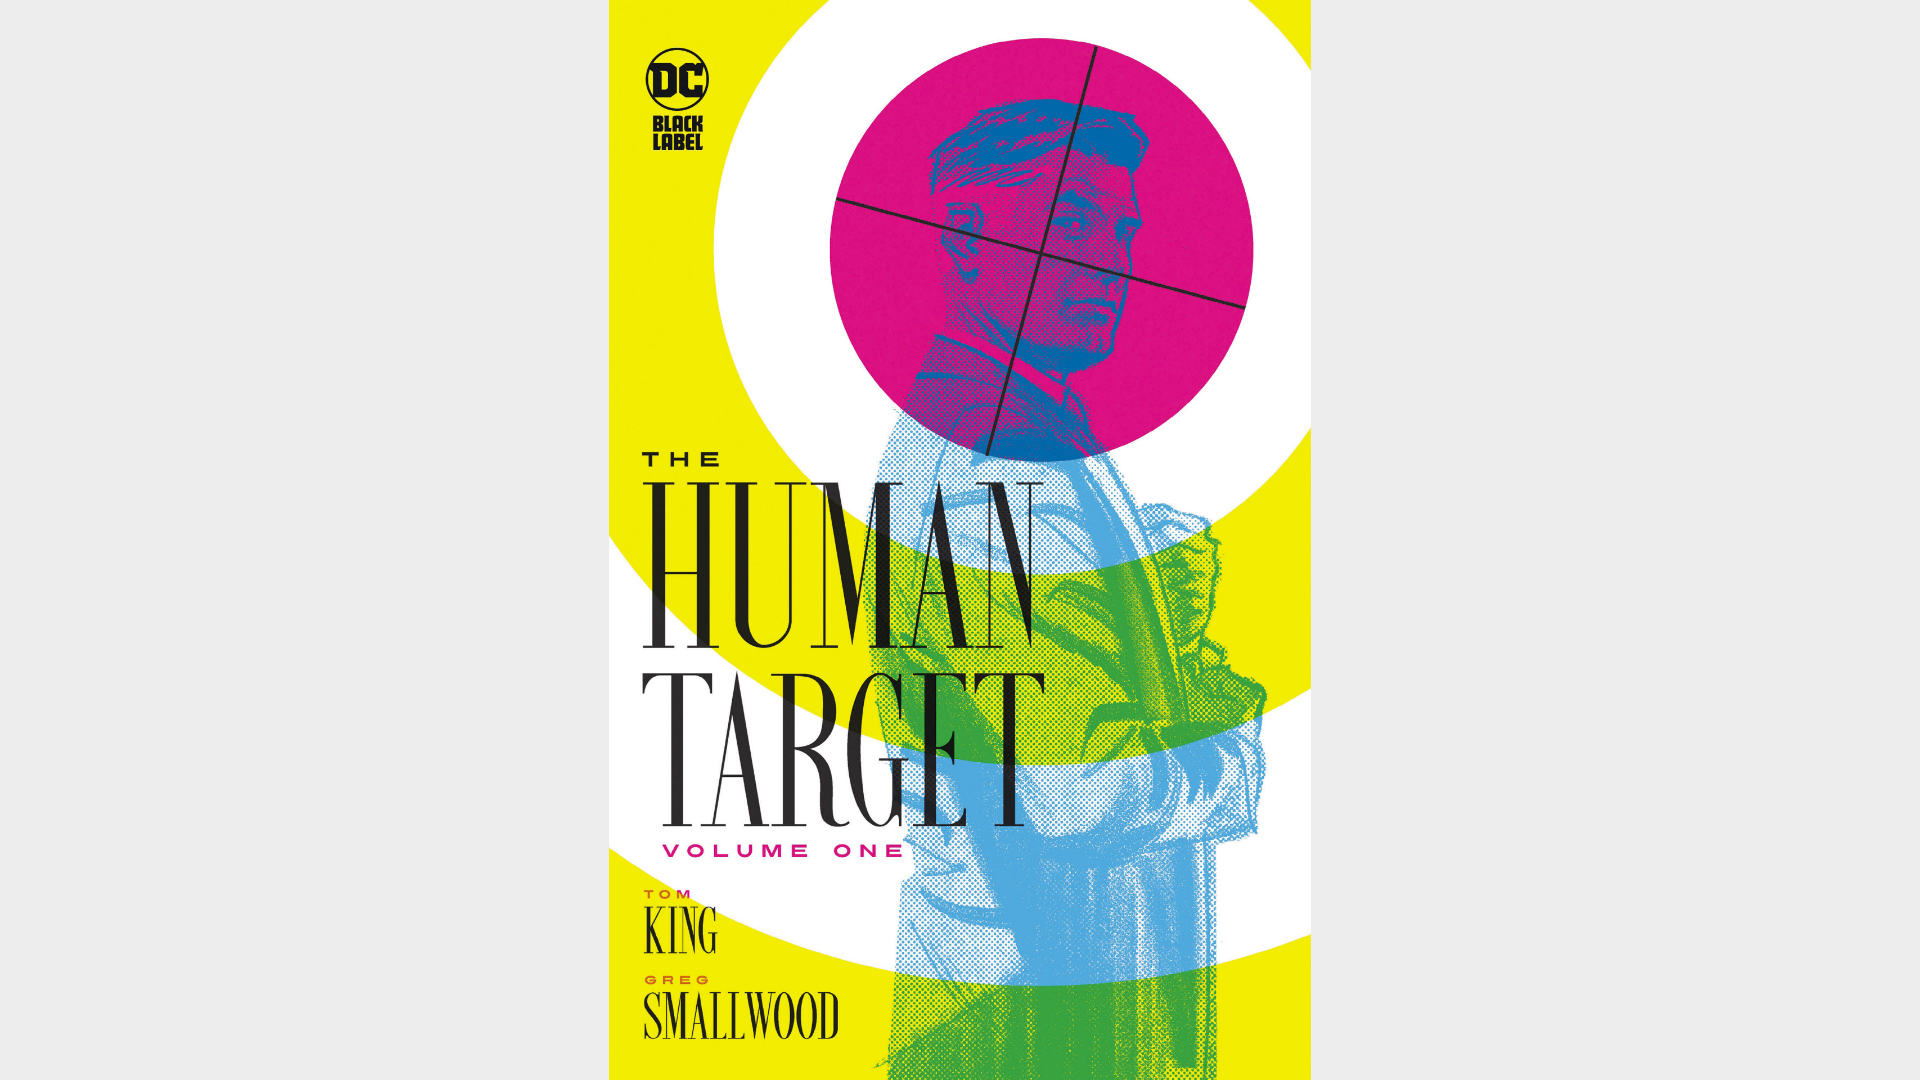 THE HUMAN TARGET VOLUME ONE